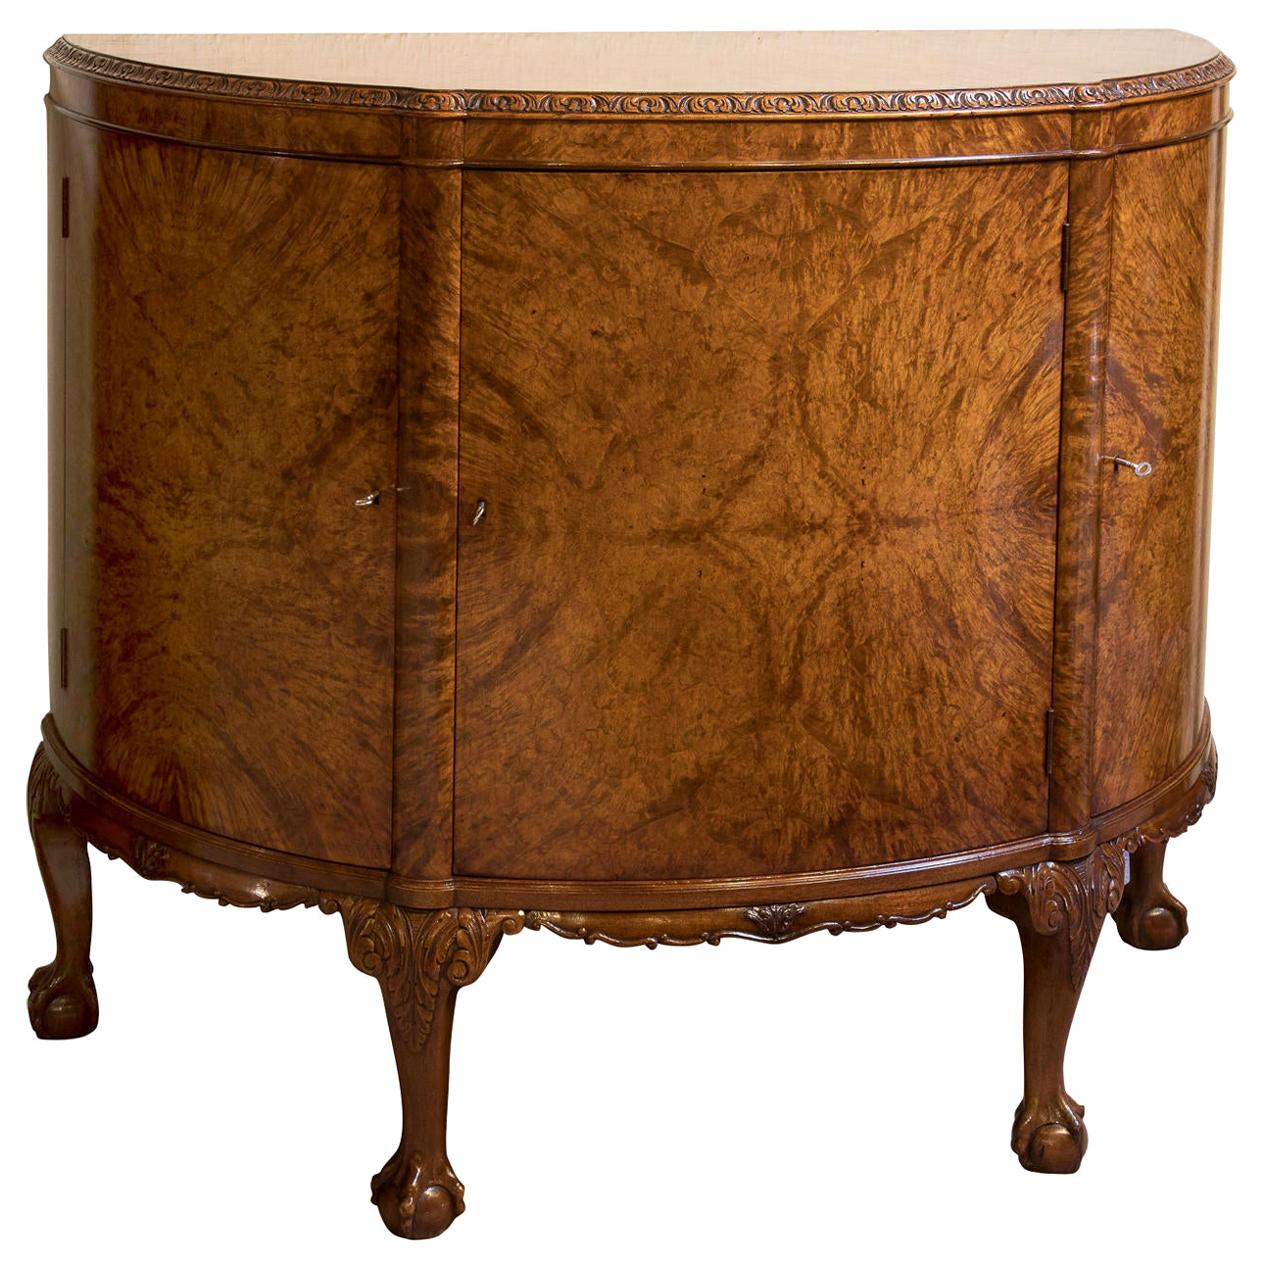 Burr Walnut Demilune Cabinet by Waring & Gillow, circa 1930